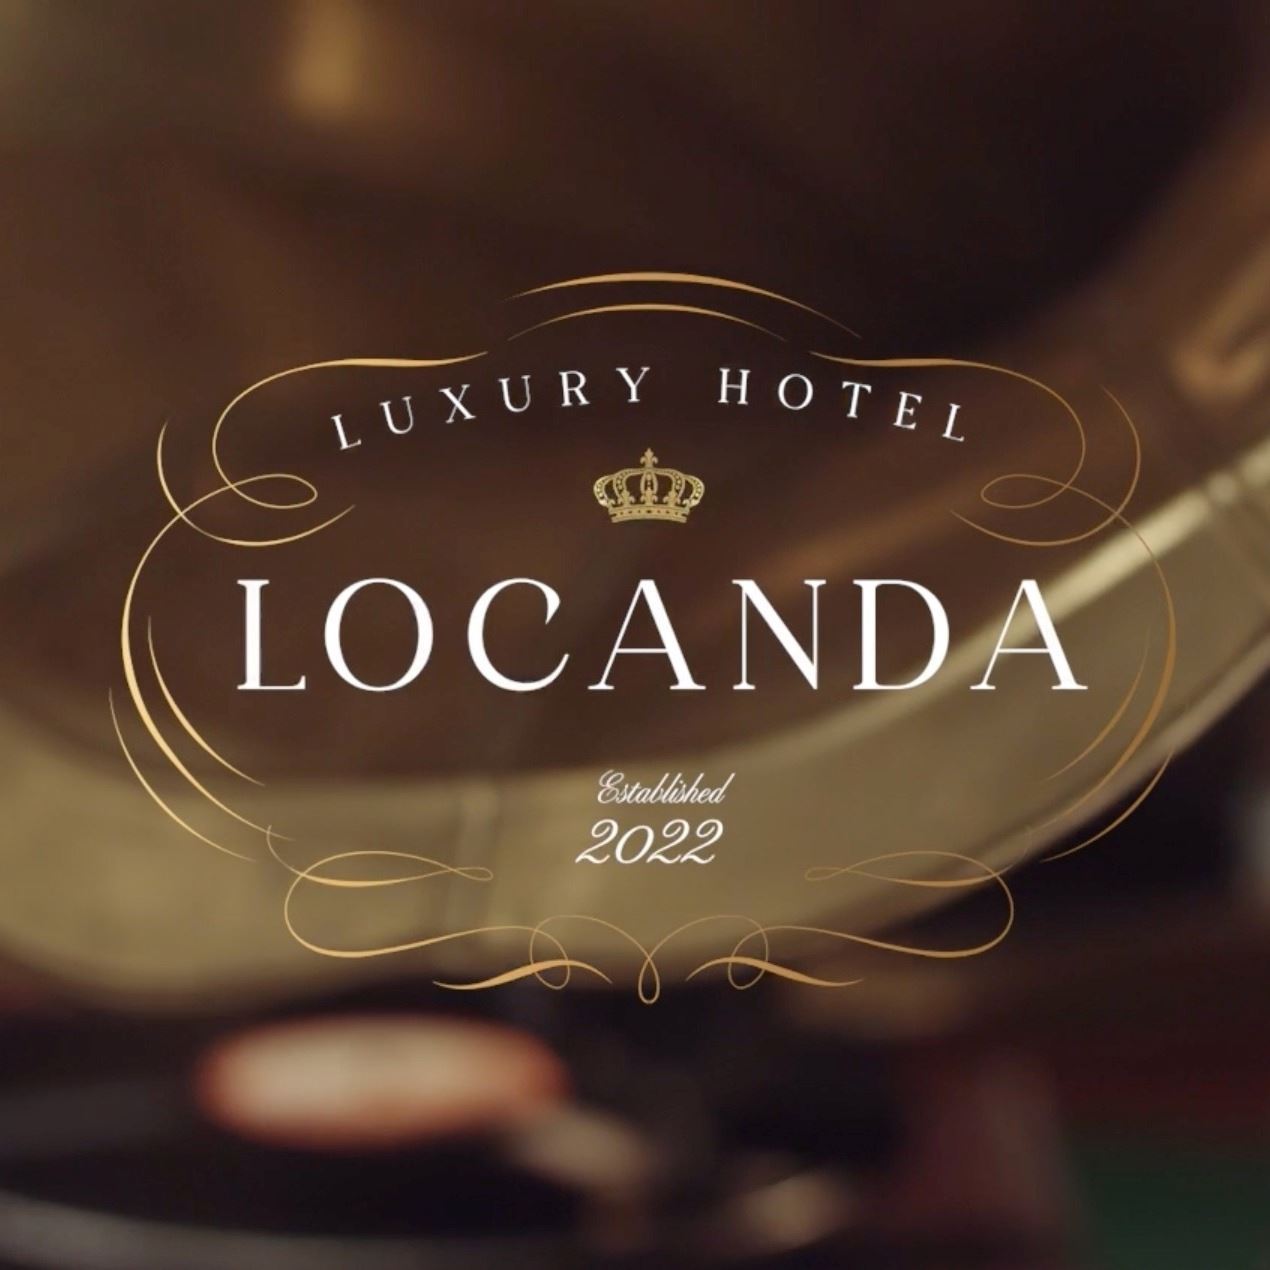 Amr Diab announces the launch of the "Locanda" hotel chain